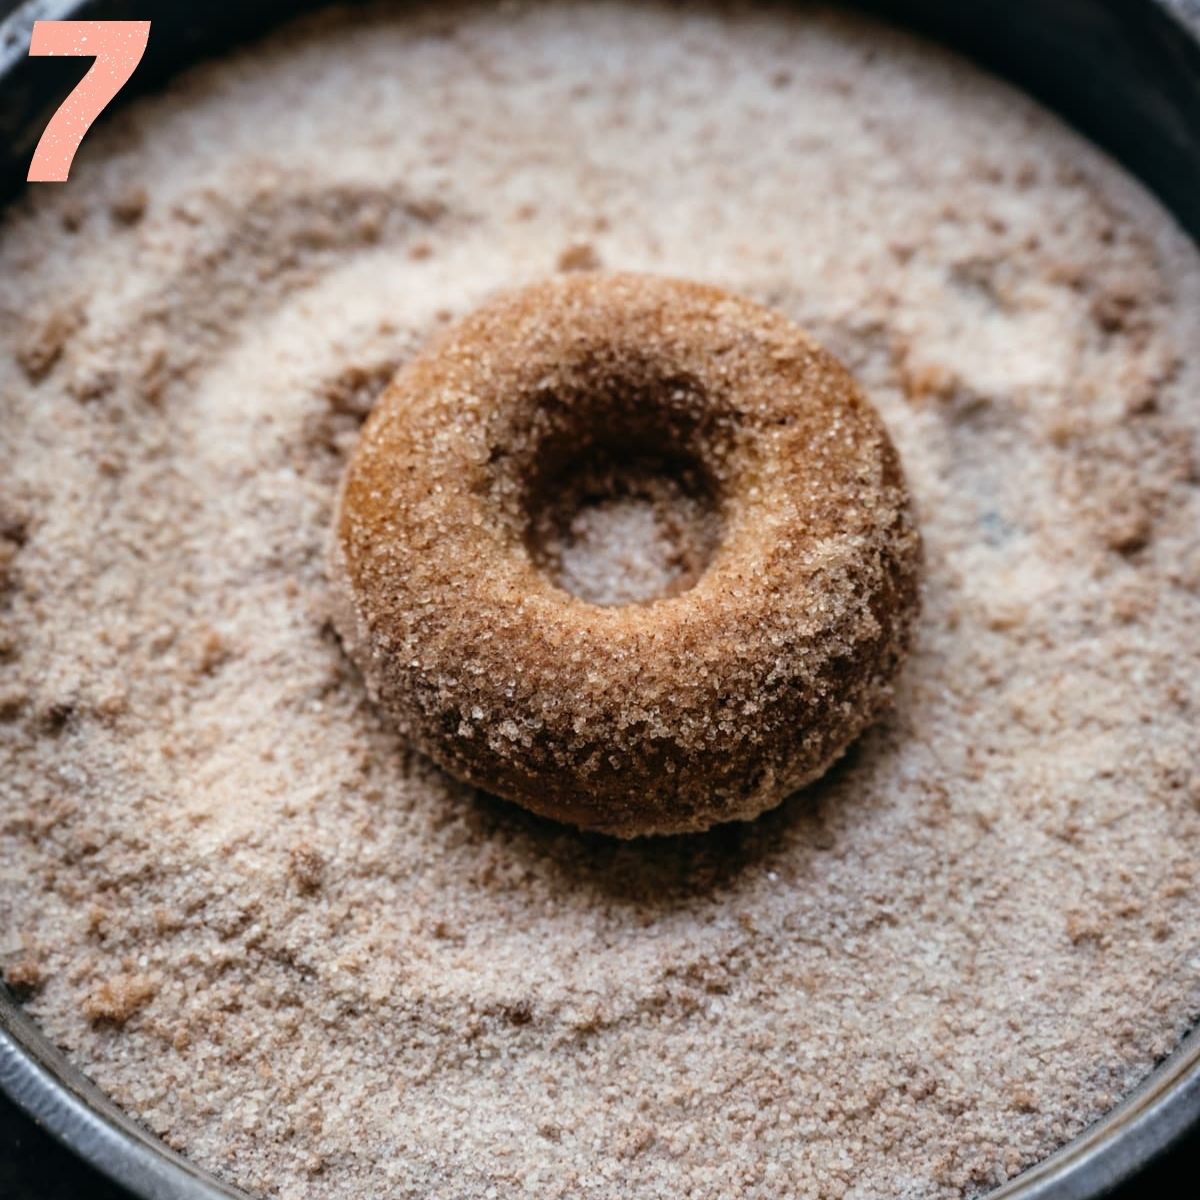 Overhead view of apple cider donut being dusted with cinnamon sugar.